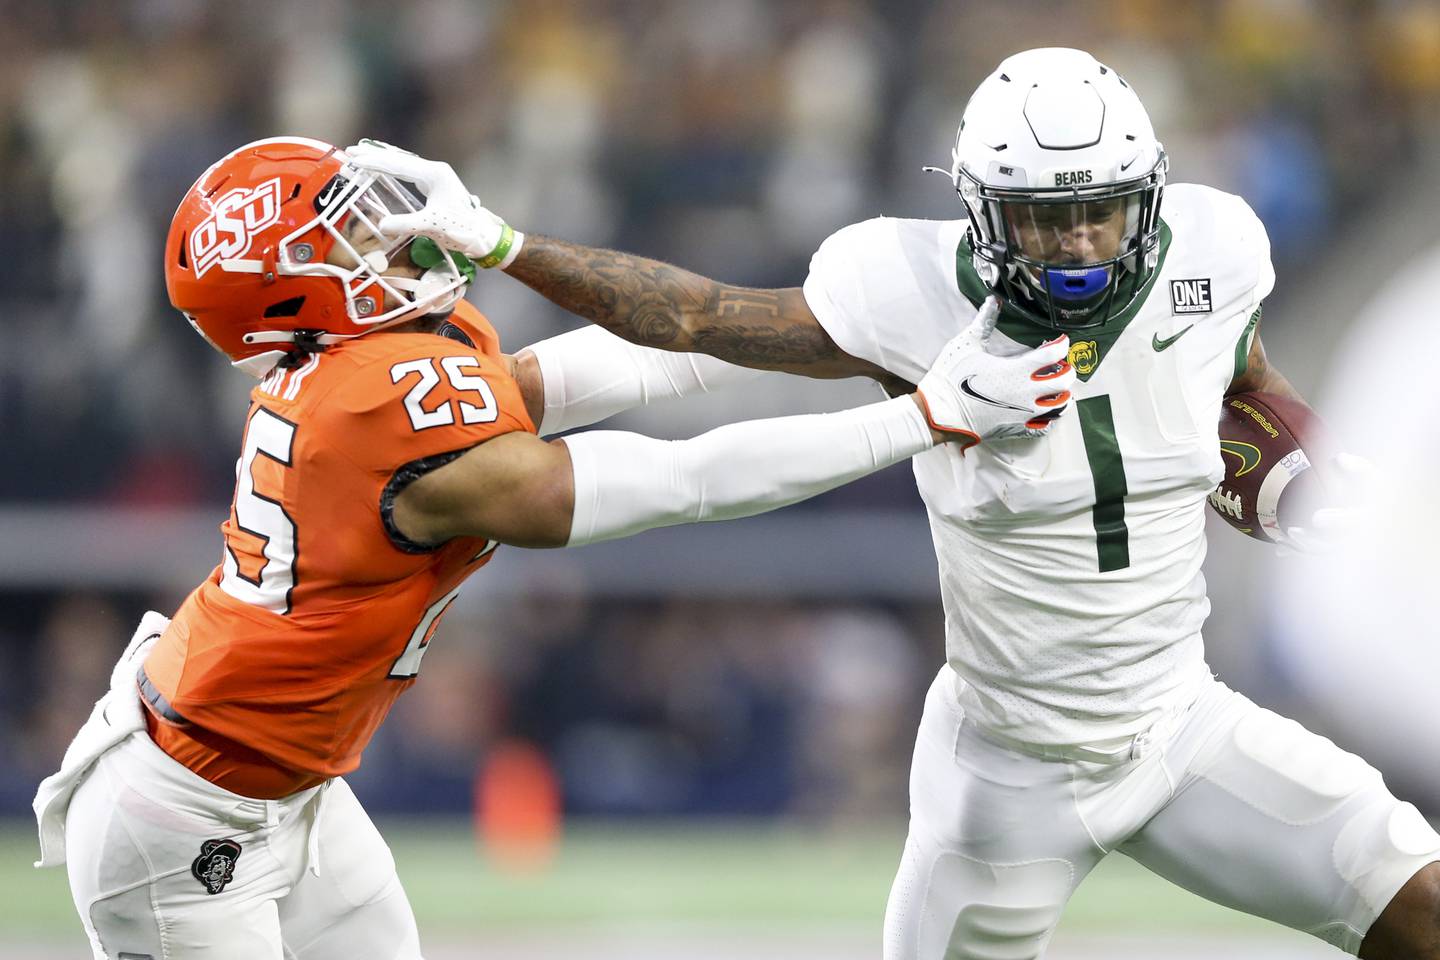 Baylor running back Trestan Ebner stiff arms Oklahoma State safety Jason Taylor II during the Big 12 Conference championship on Dec. 4, 2021 in Arlington, Texas.